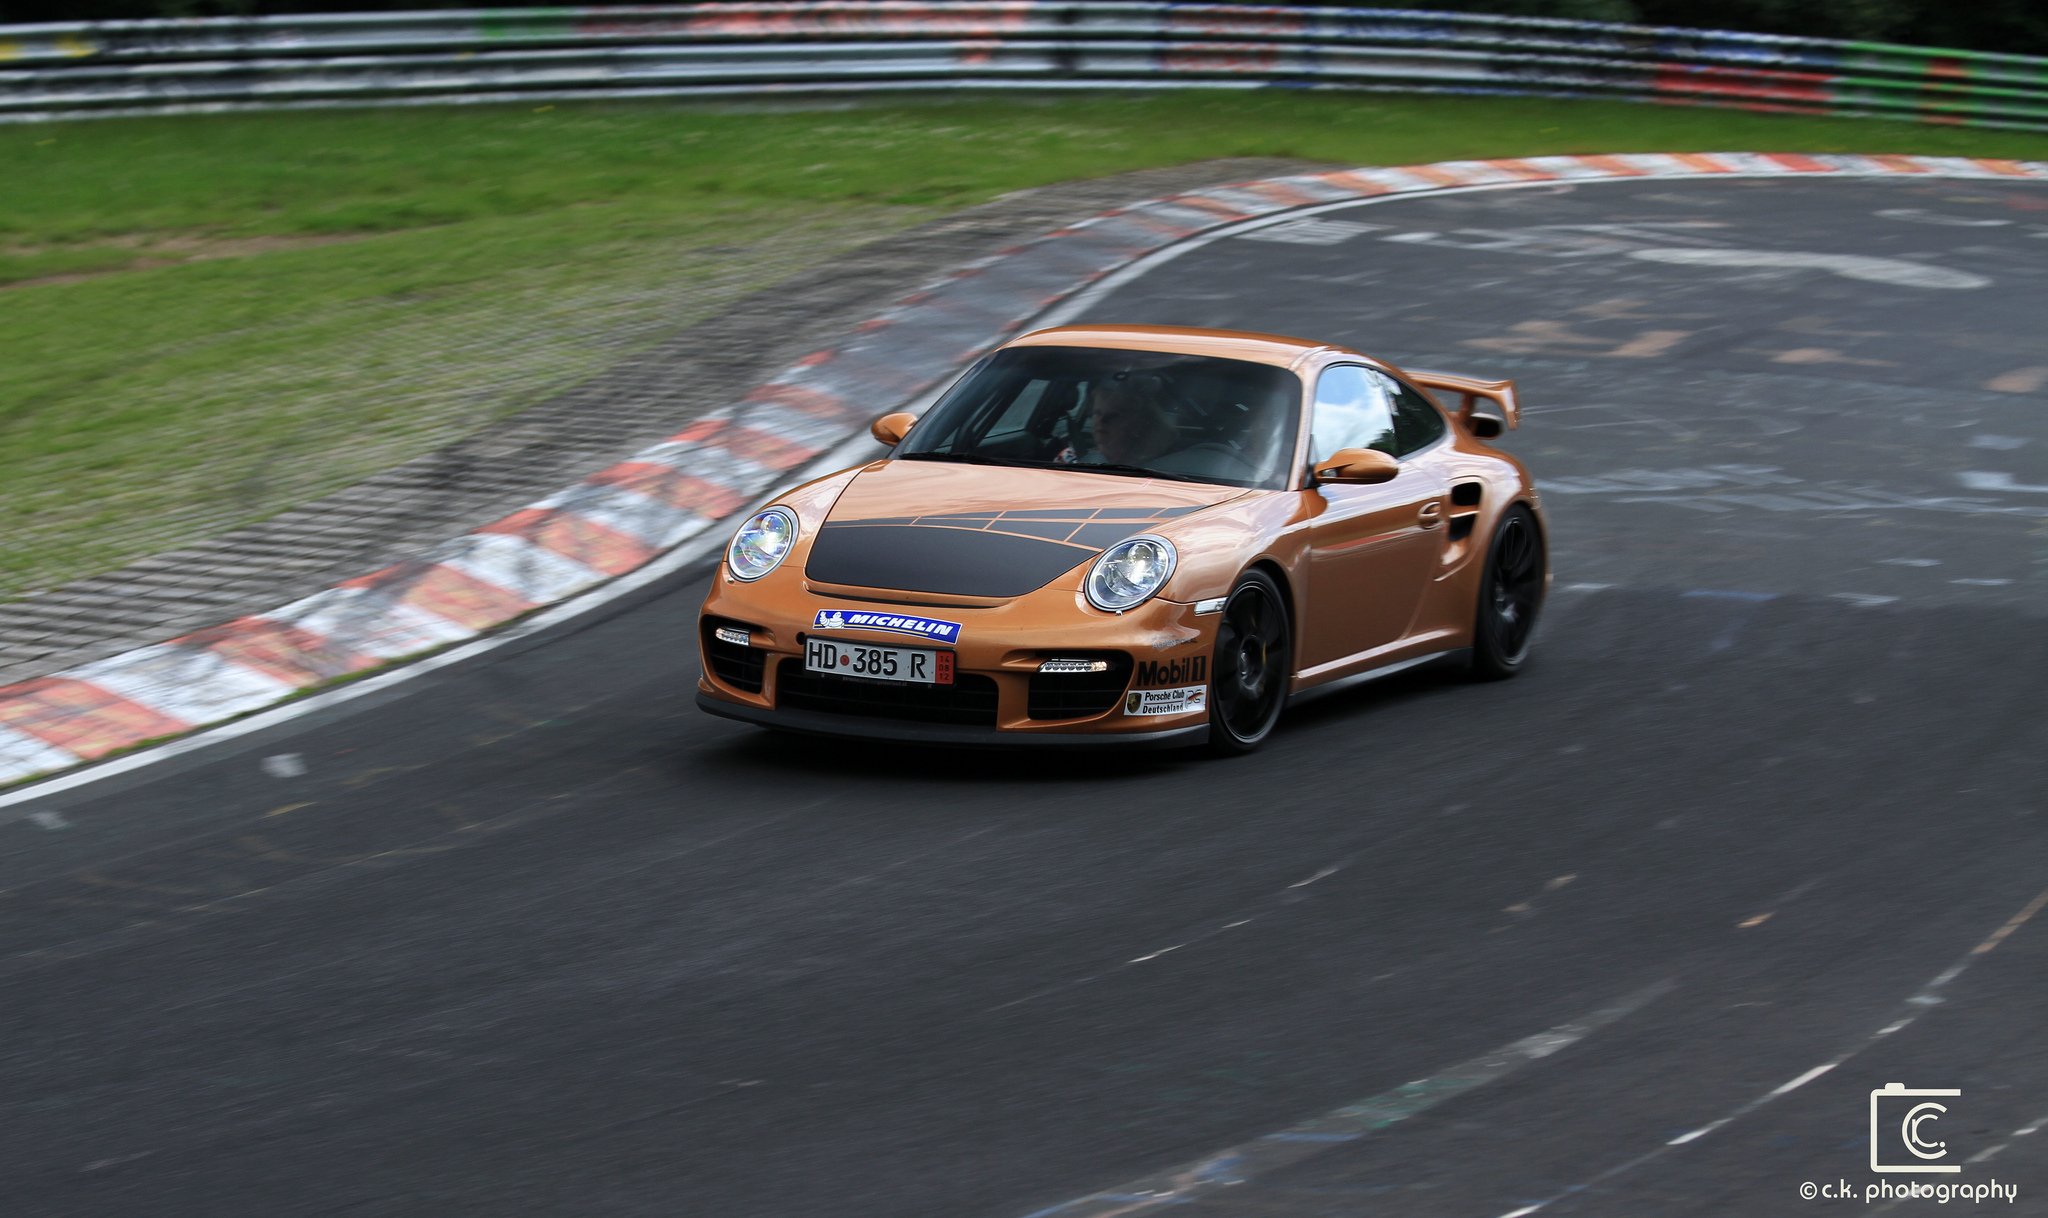 911, Cars, Coupe, Germany, Gt2, Gt2, Rs, Porsche Wallpaper